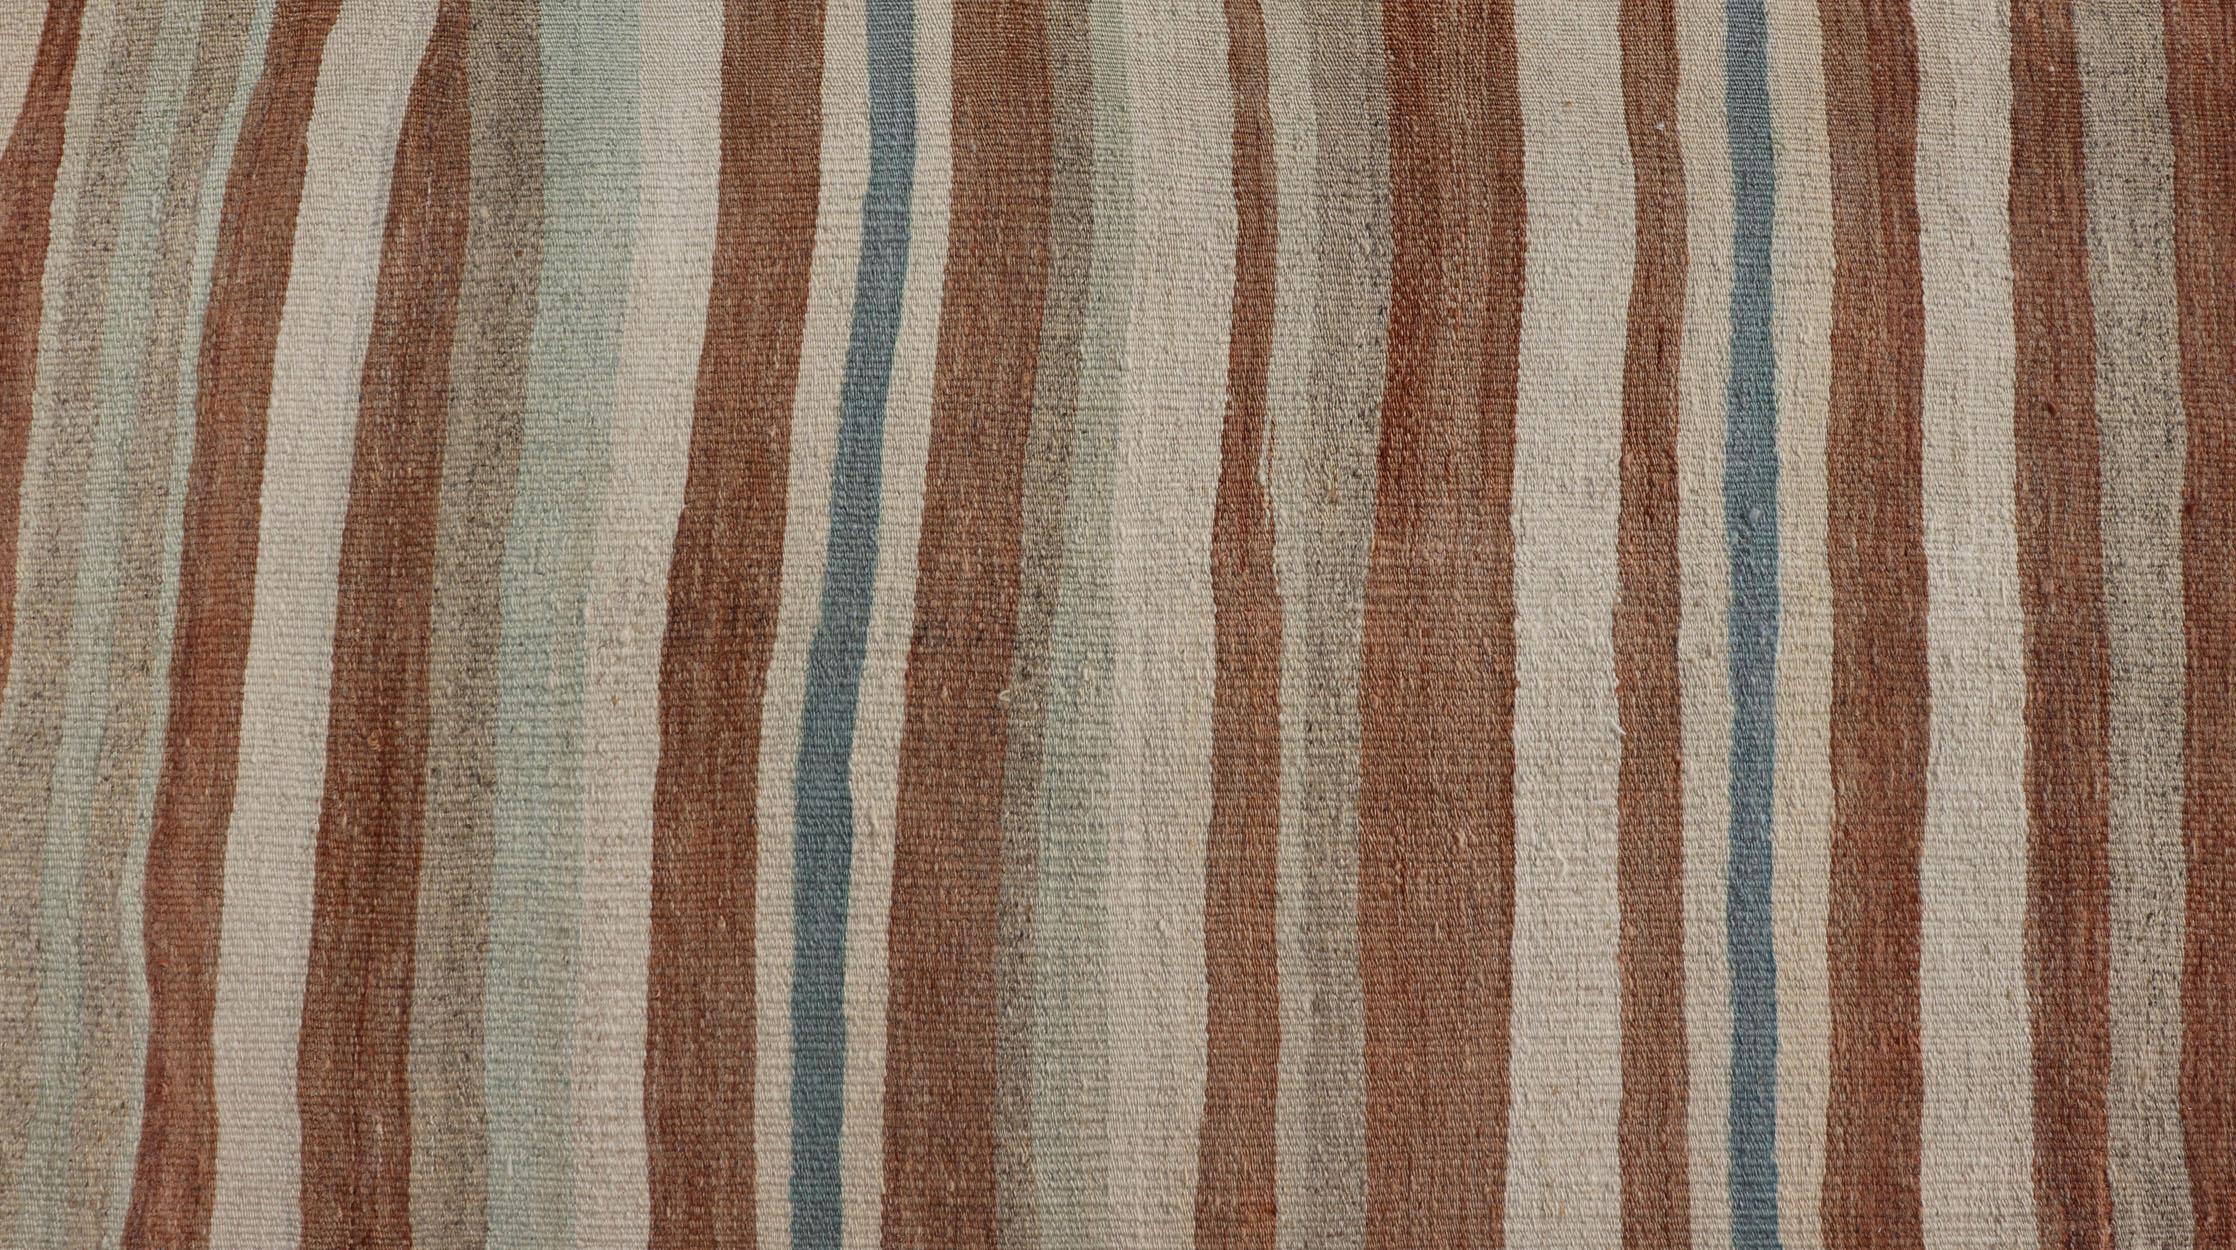 Striped Vintage Turkish Kilim Runner in Shades of Brown, Cream, and Blue For Sale 4